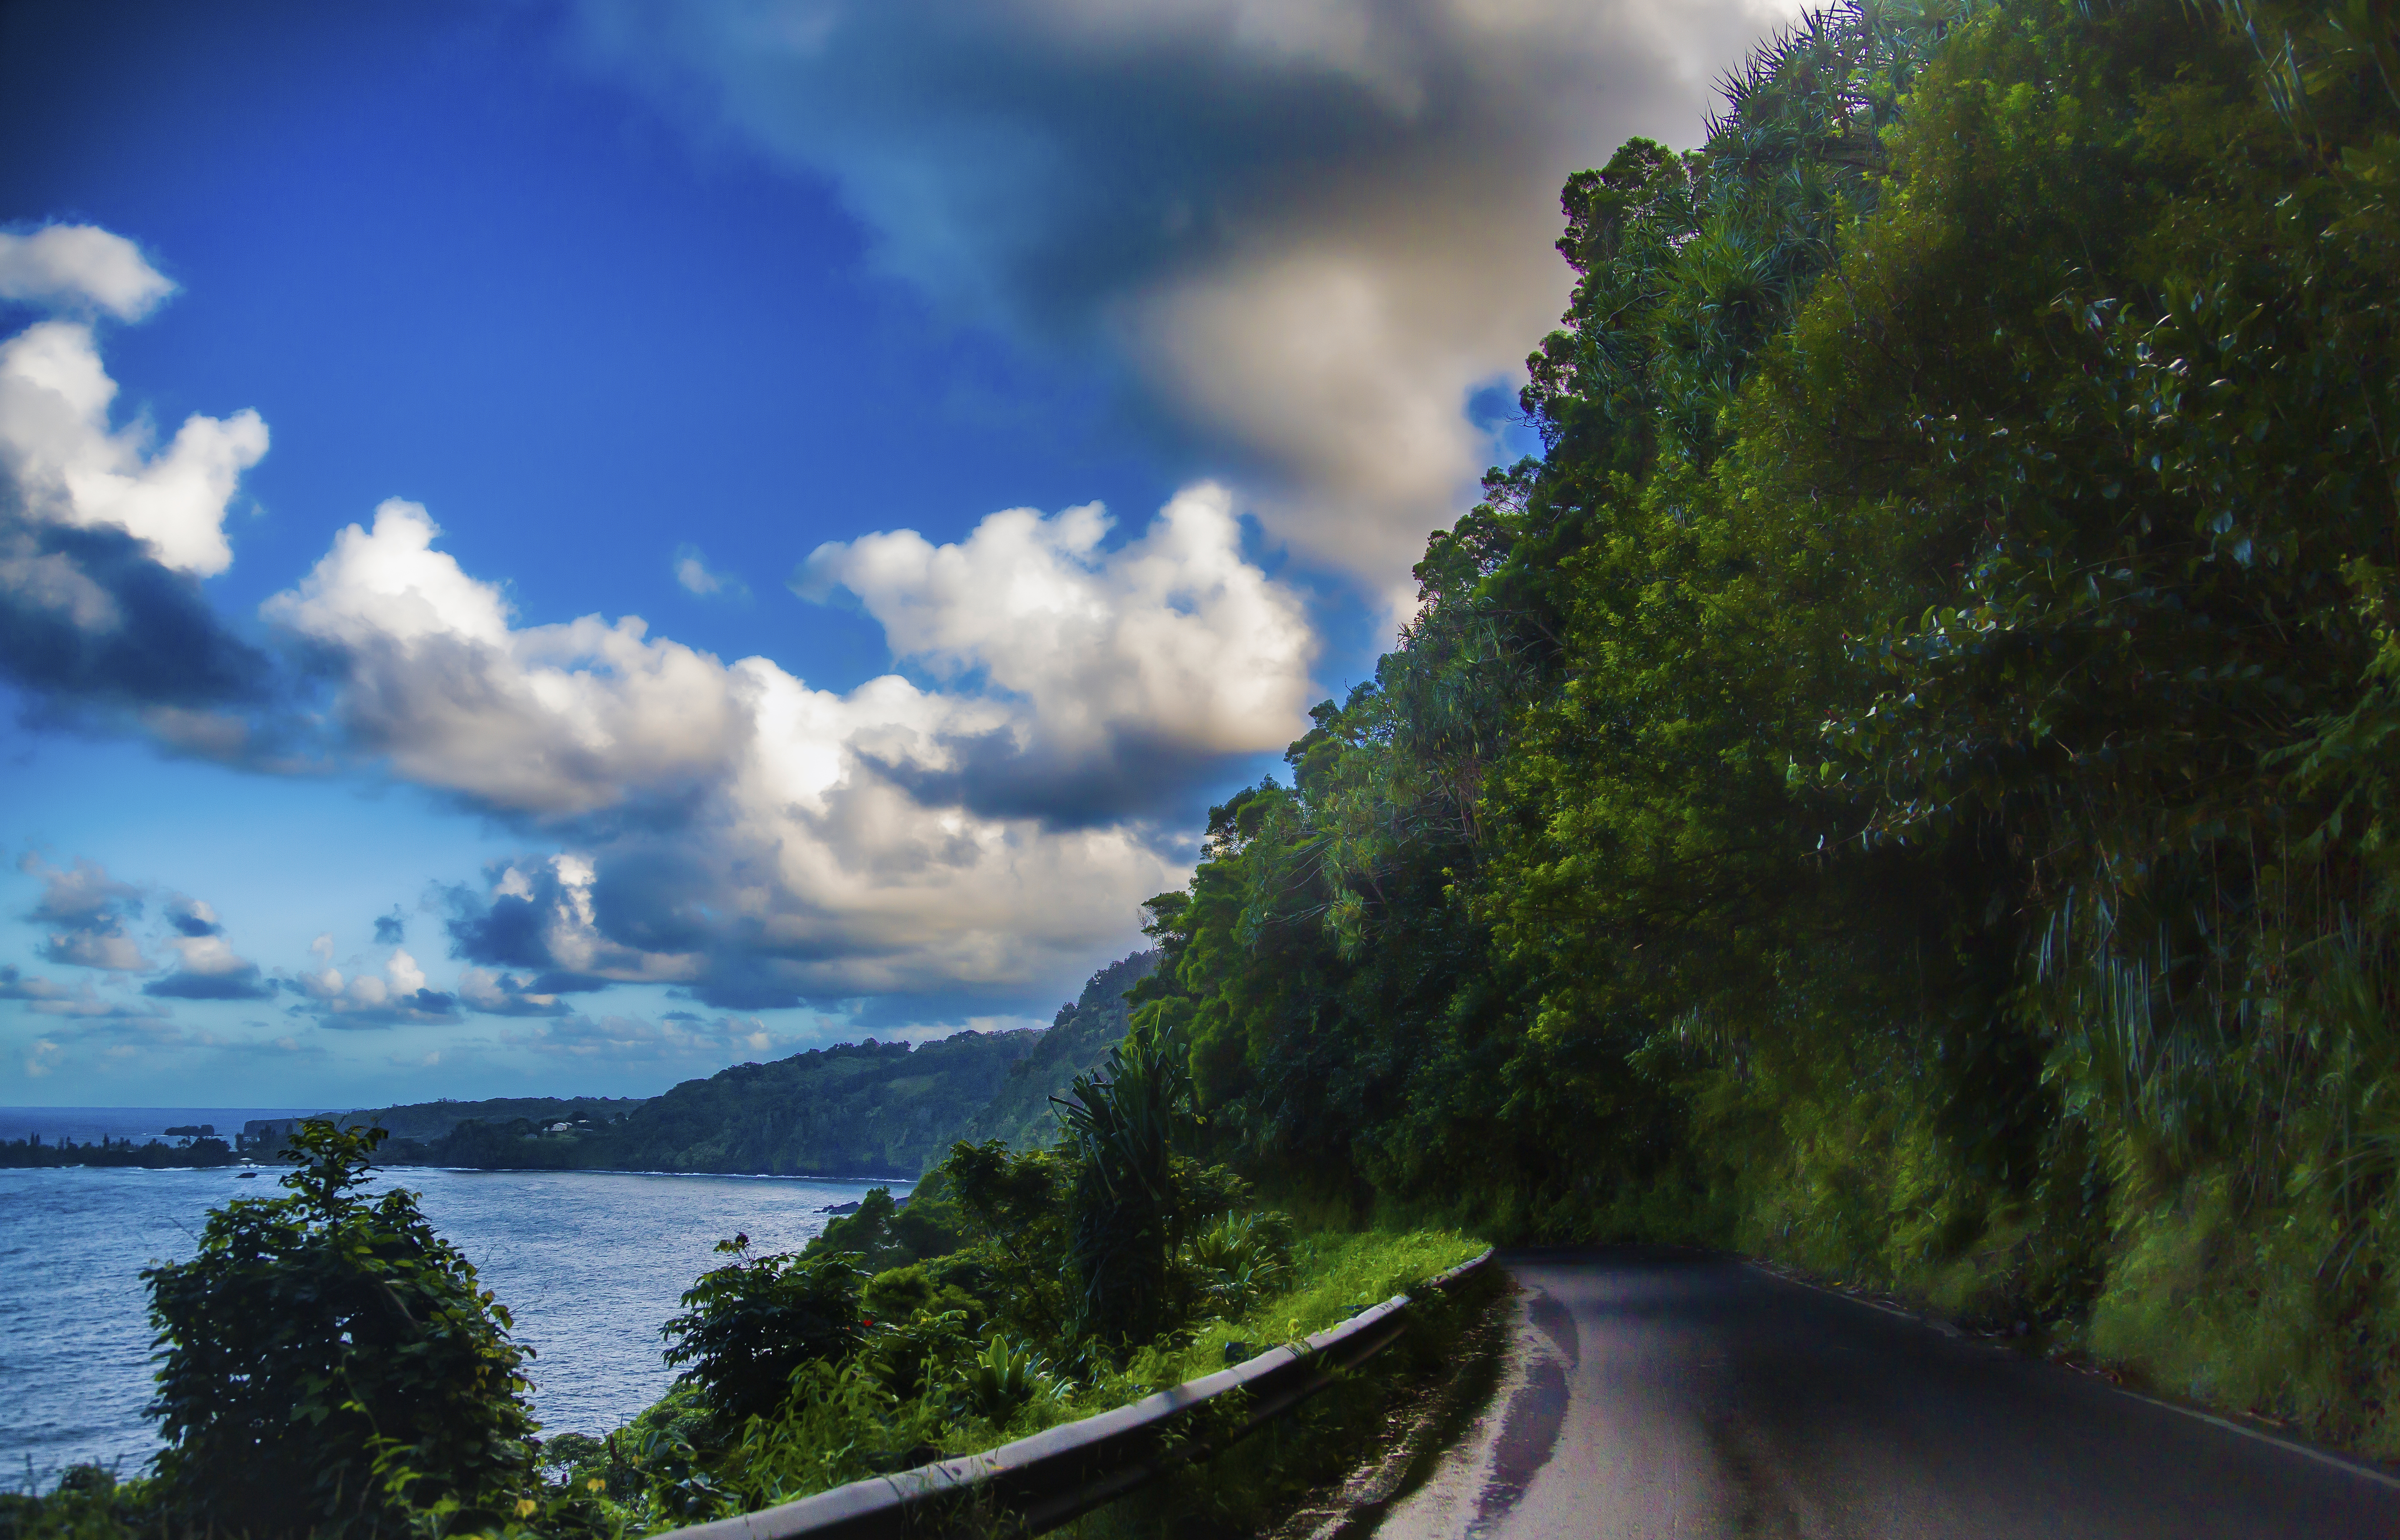 The Hana Highway on the Hawaiian island of Maui. The road has almost 500 turns between the towns of Paia and Hana.